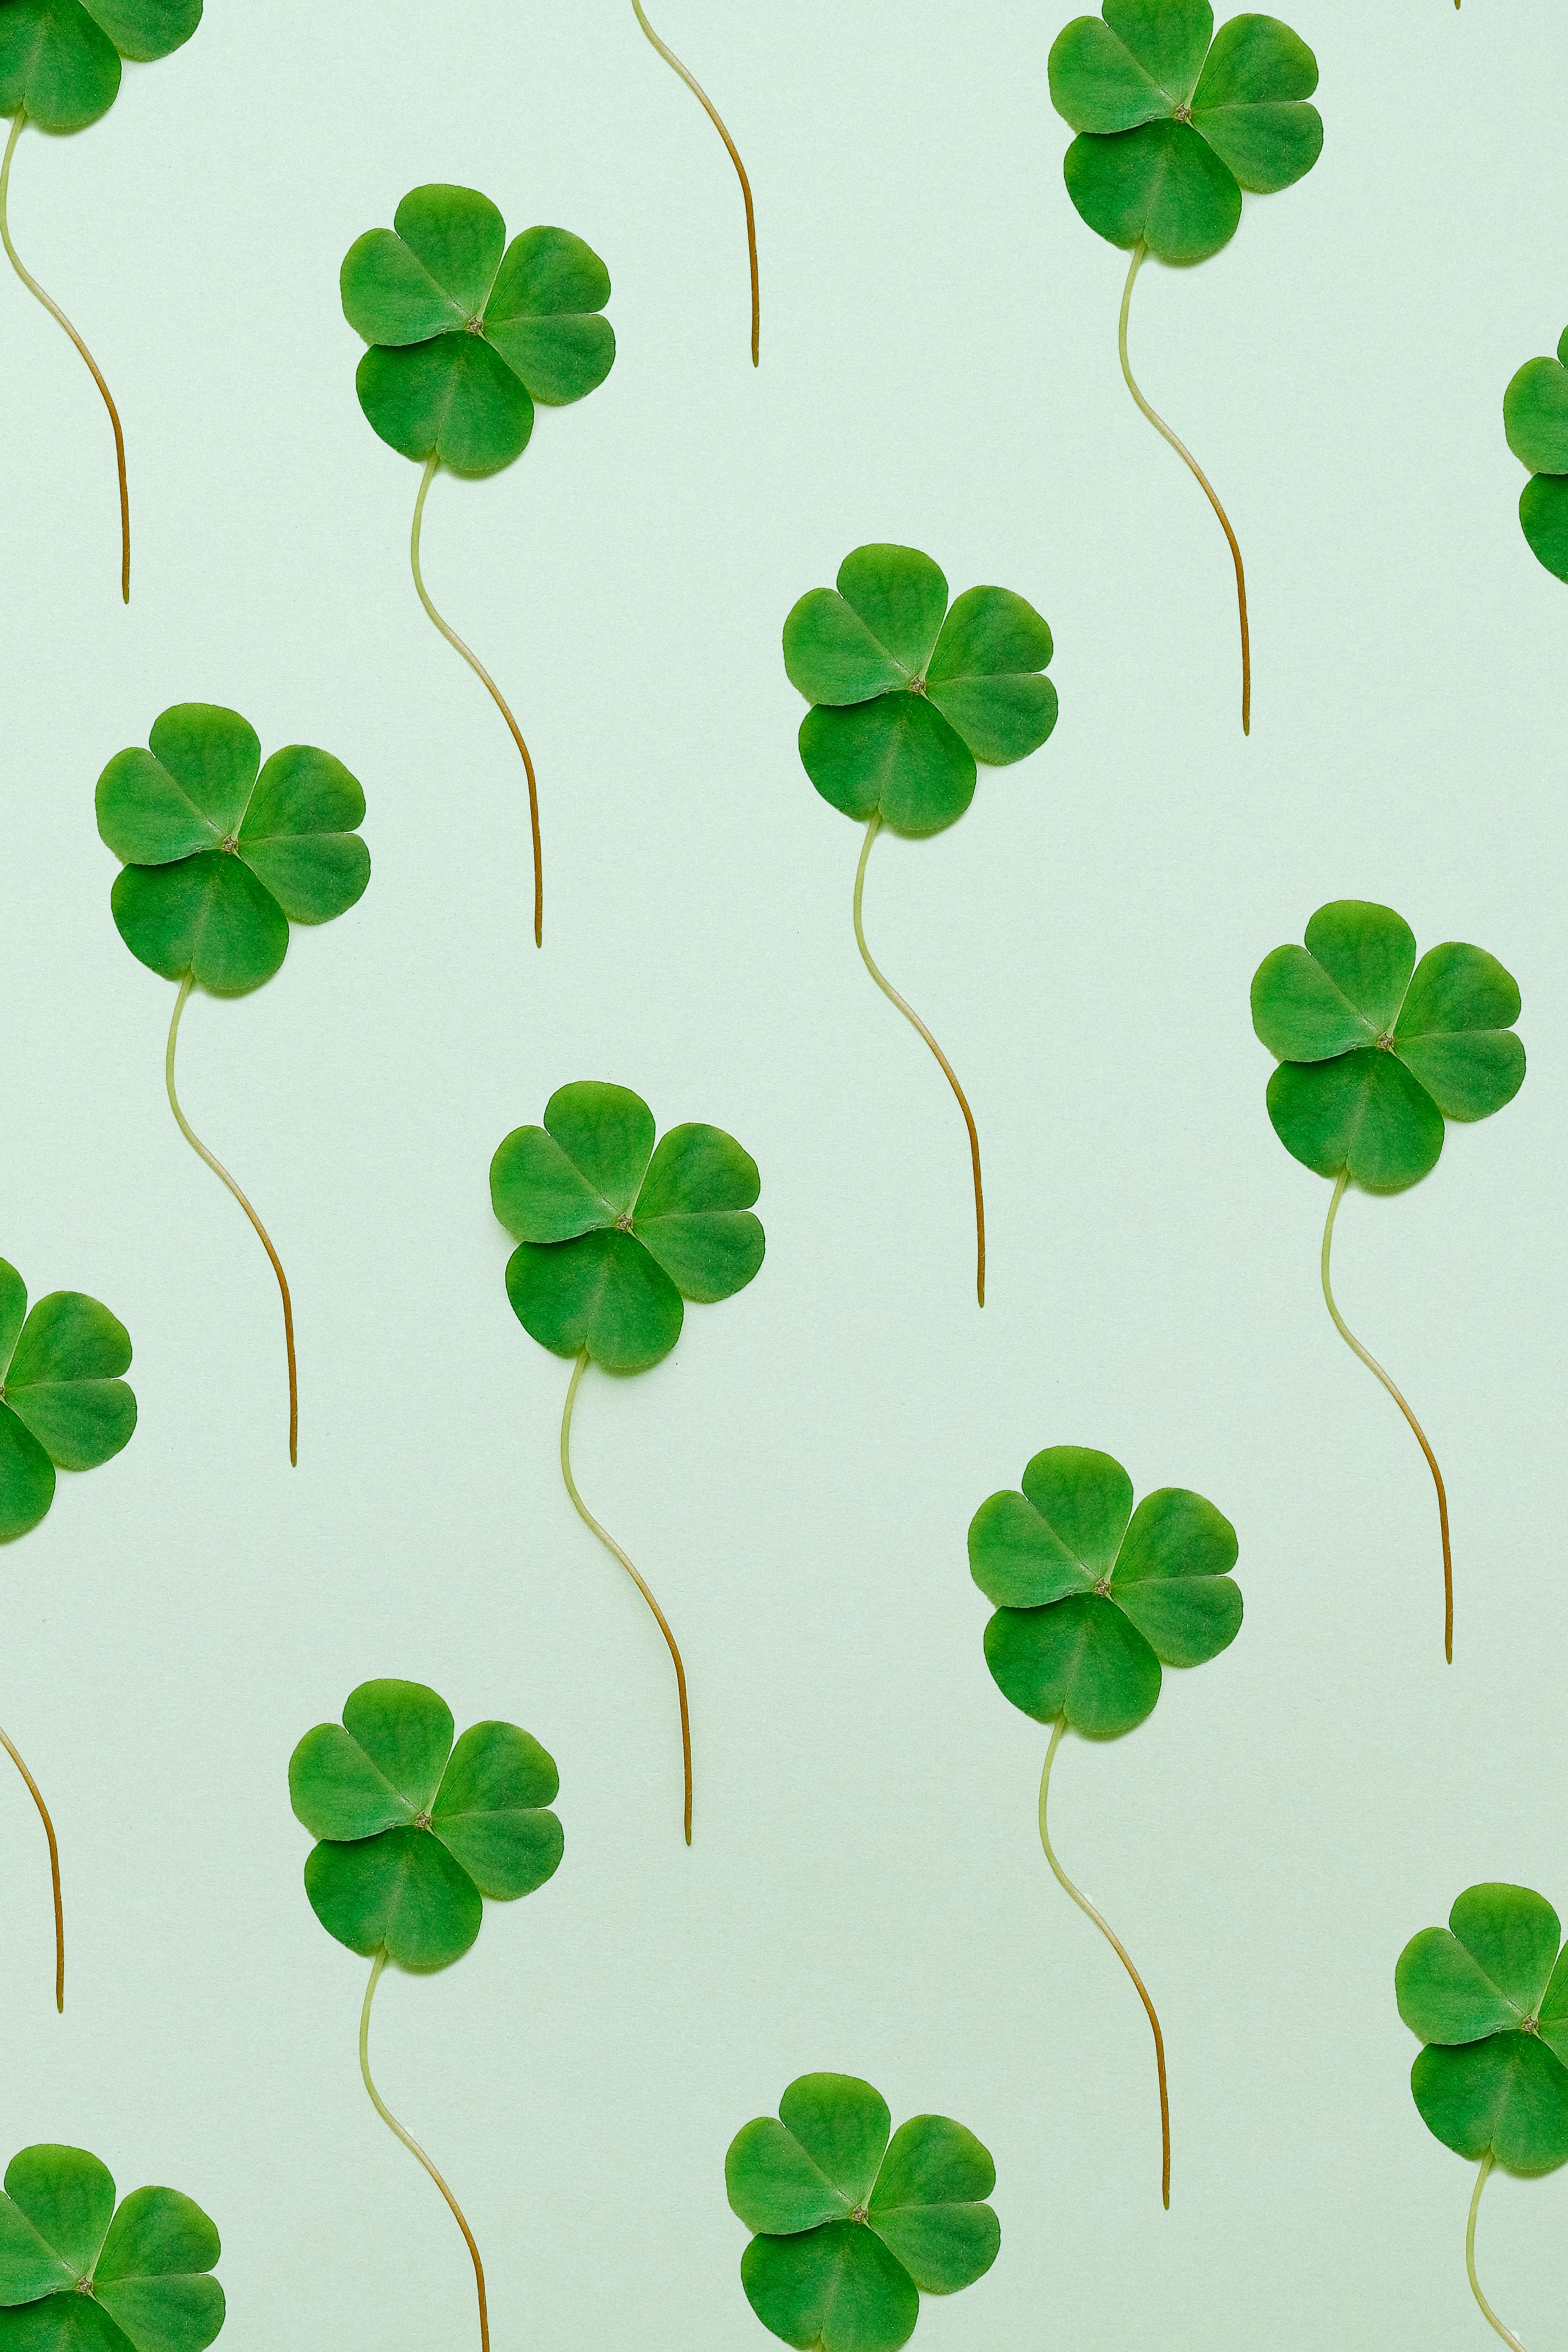 Luck Photos, Download The BEST Free Luck Stock Photos & HD Images